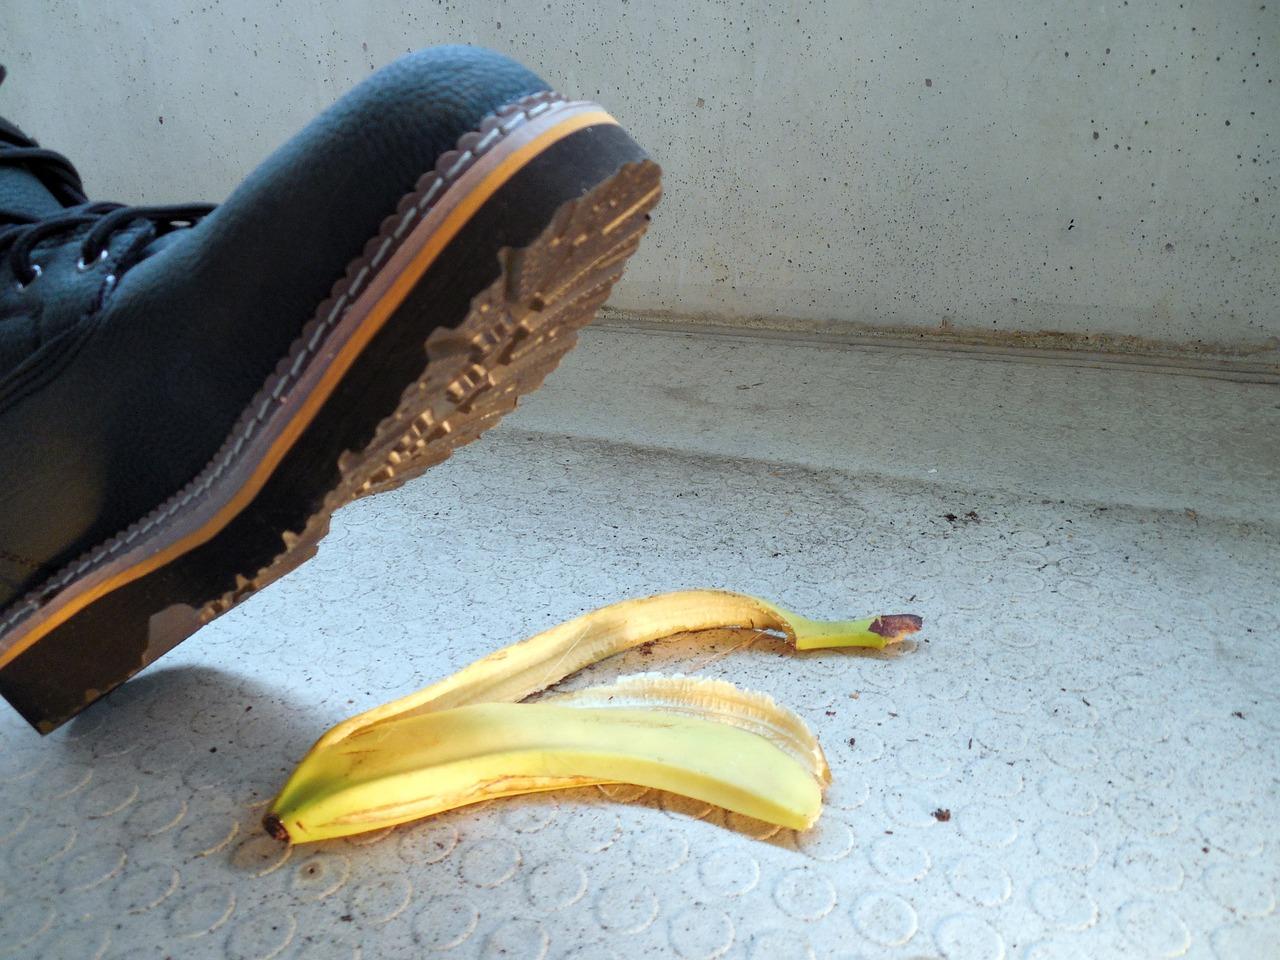 A shoe and peel of a banana</p>
<p>Description automatically generated